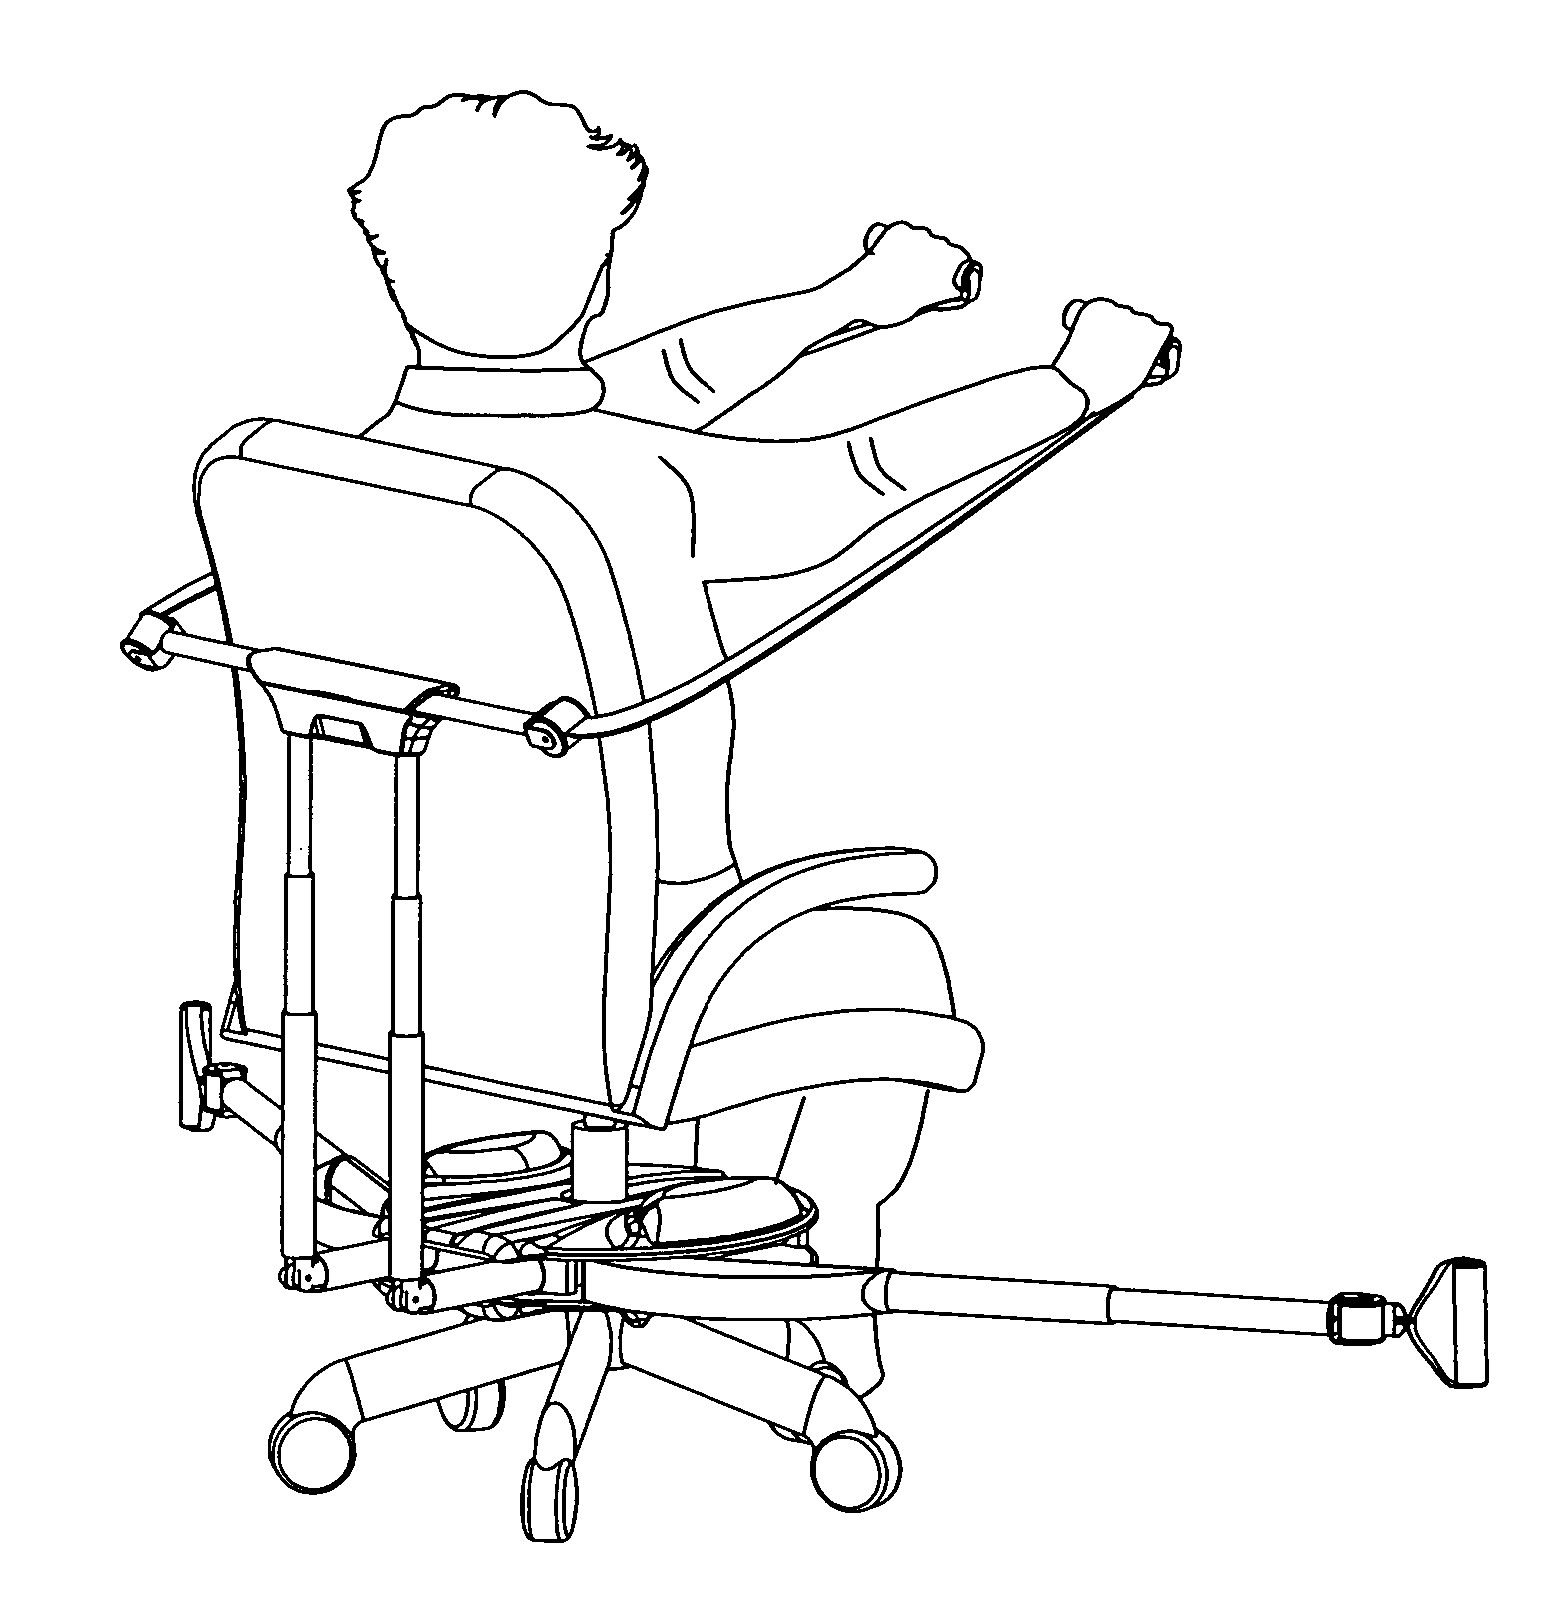 Compact office exercise unit